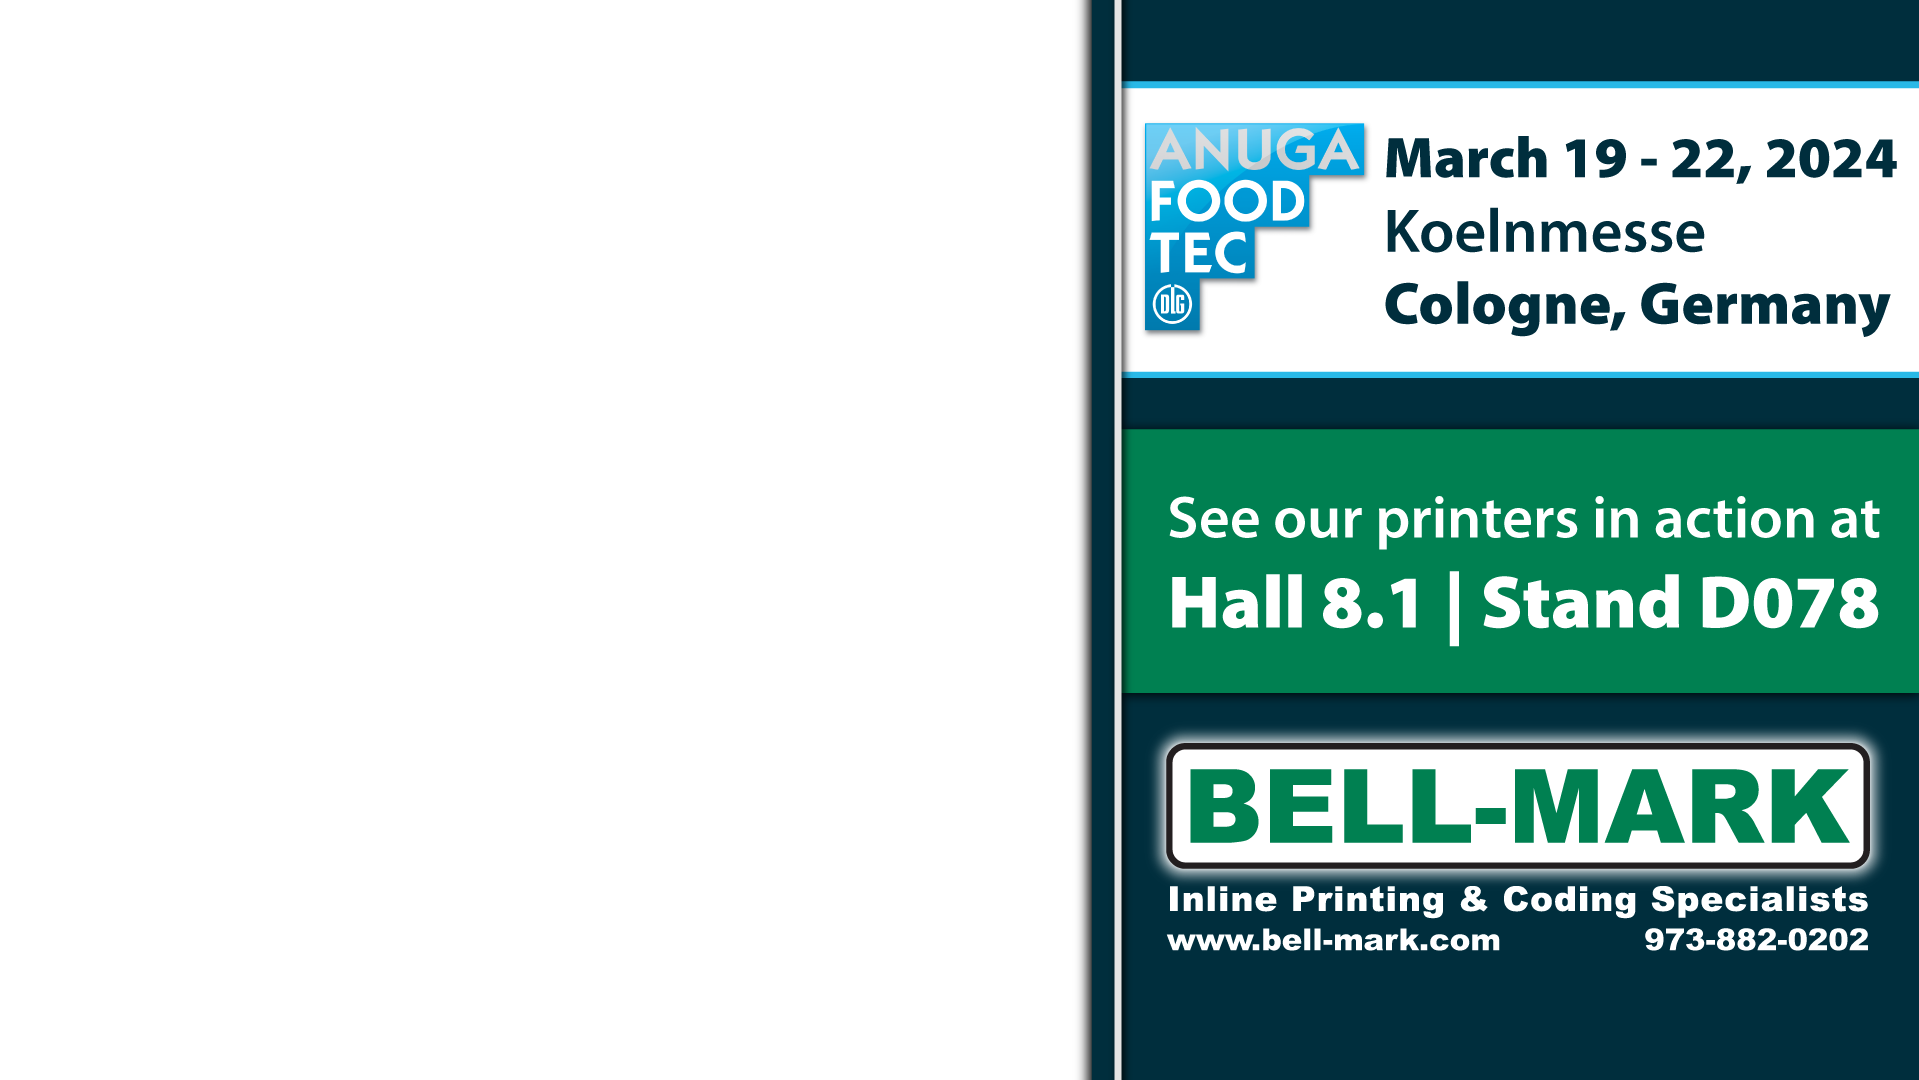 Anuga Food Tec | March 19 - 22, 2024 | Koelnmesse | Cologne, Germany | See our printers in action at Hall 8.1 - Stand D078 |
										BELL-MARK Inline Printing & Coding Specialists | www.bell-mark.com - 973-882-0202